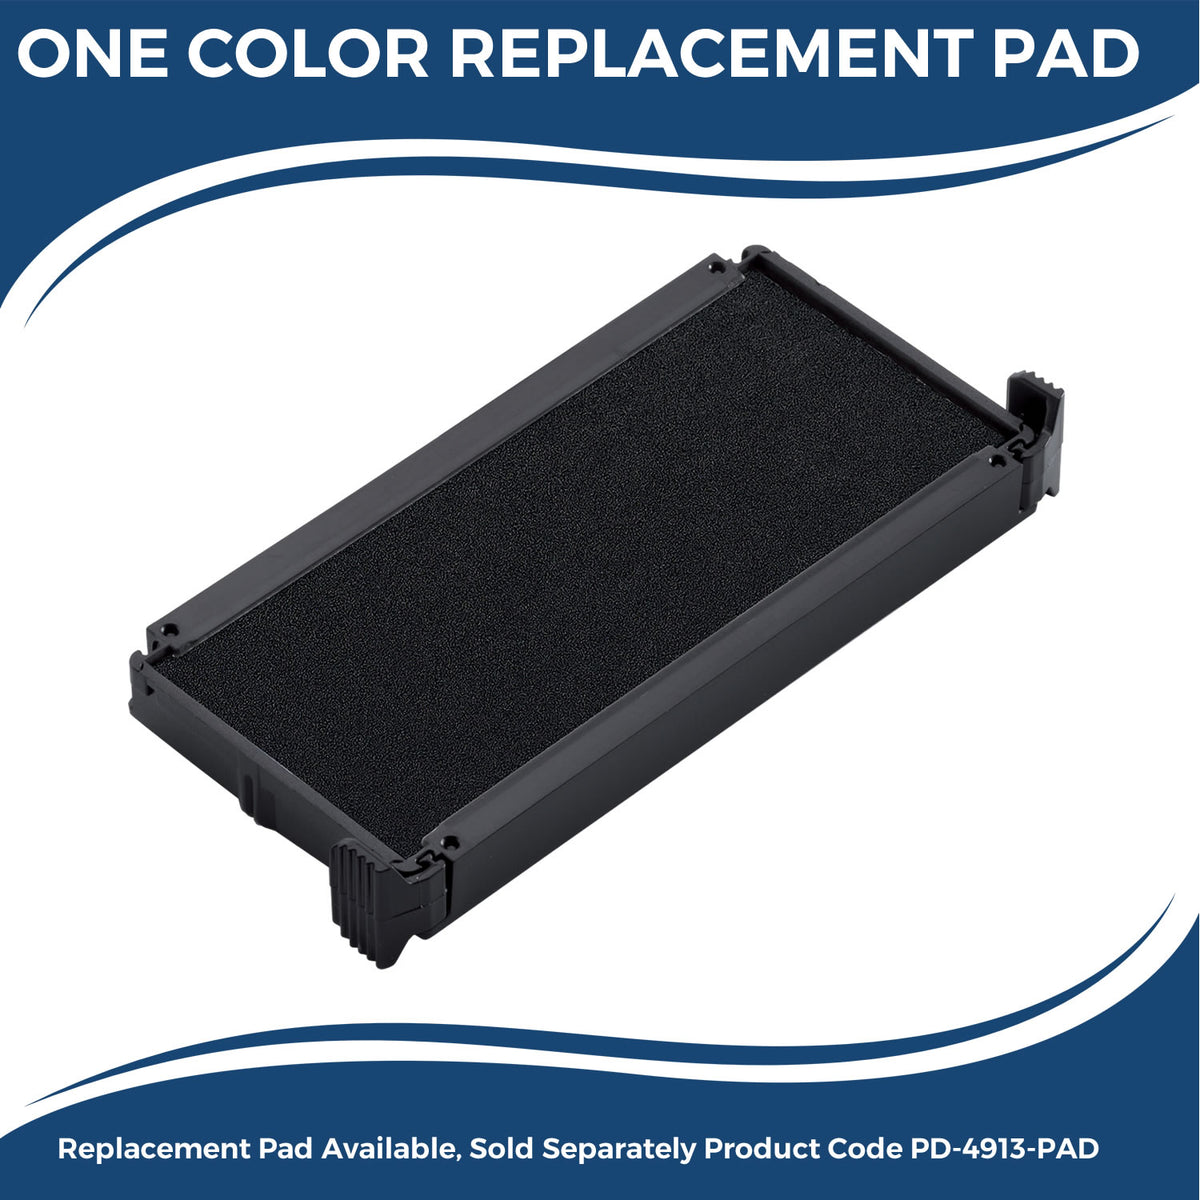 Large Self Inking Change Of Address Stamp 4560S Large Replacment Pad